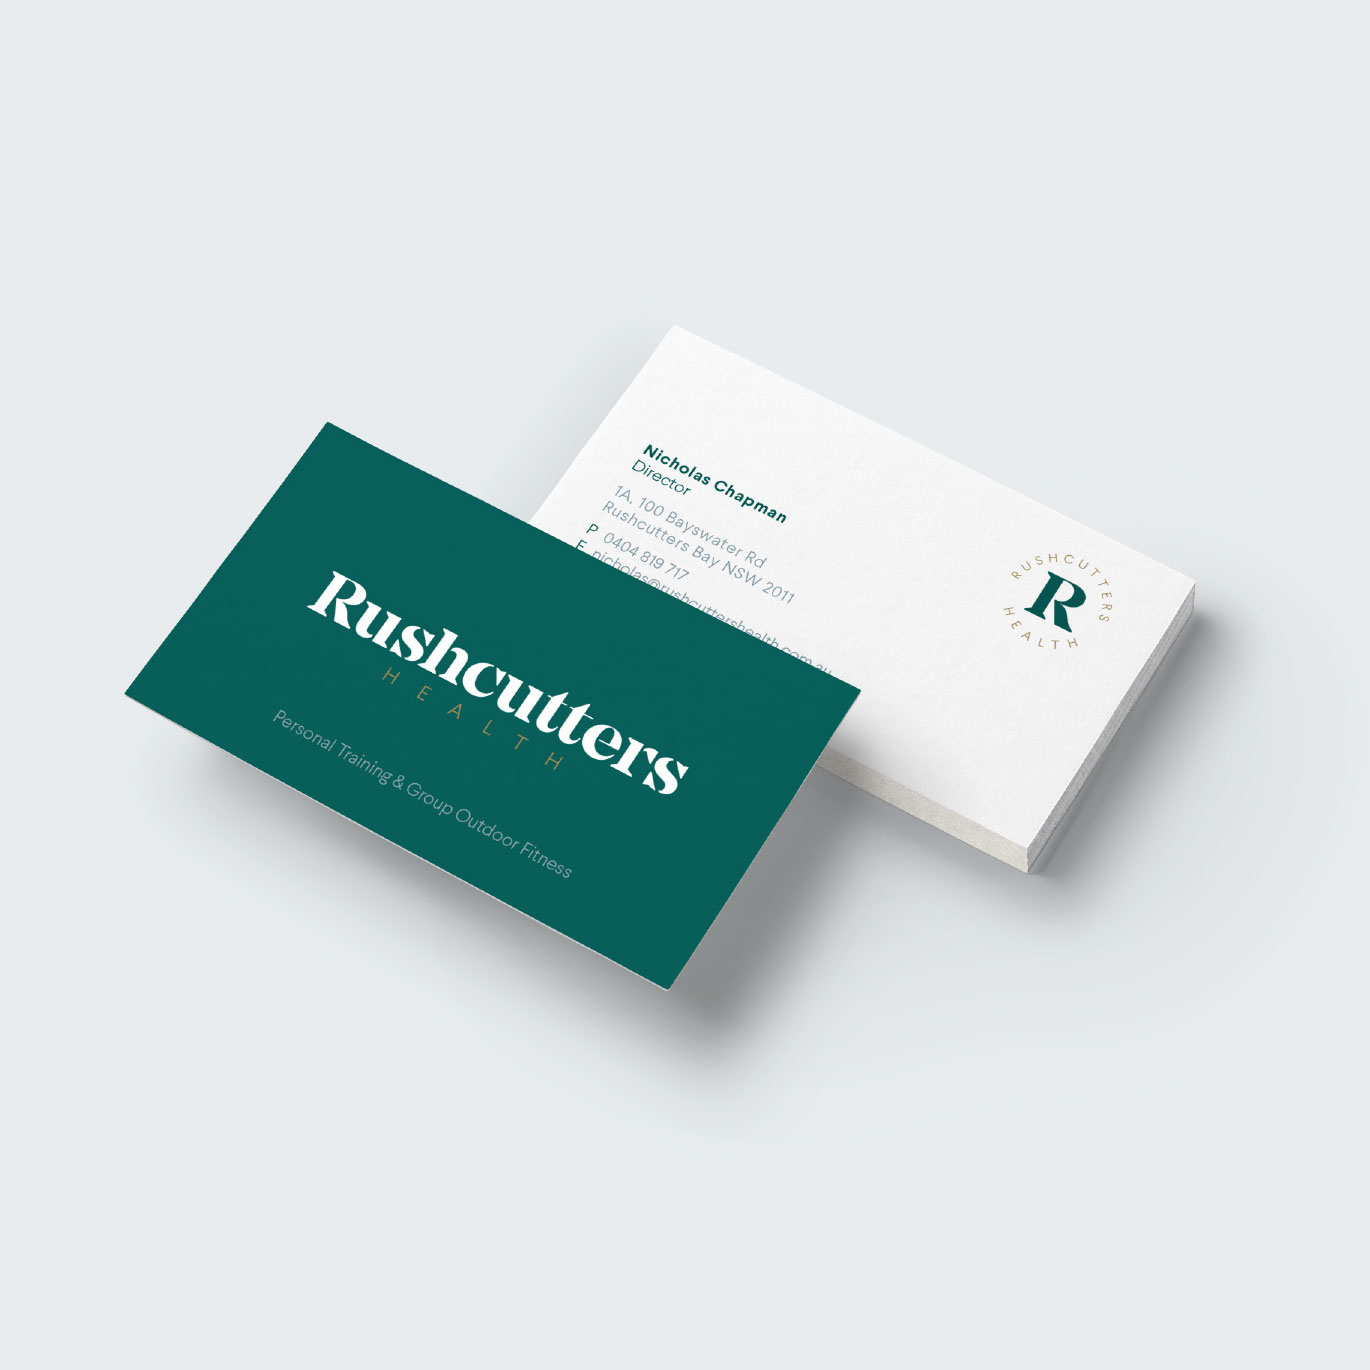 Rushcutters Health Gym Branding and Design